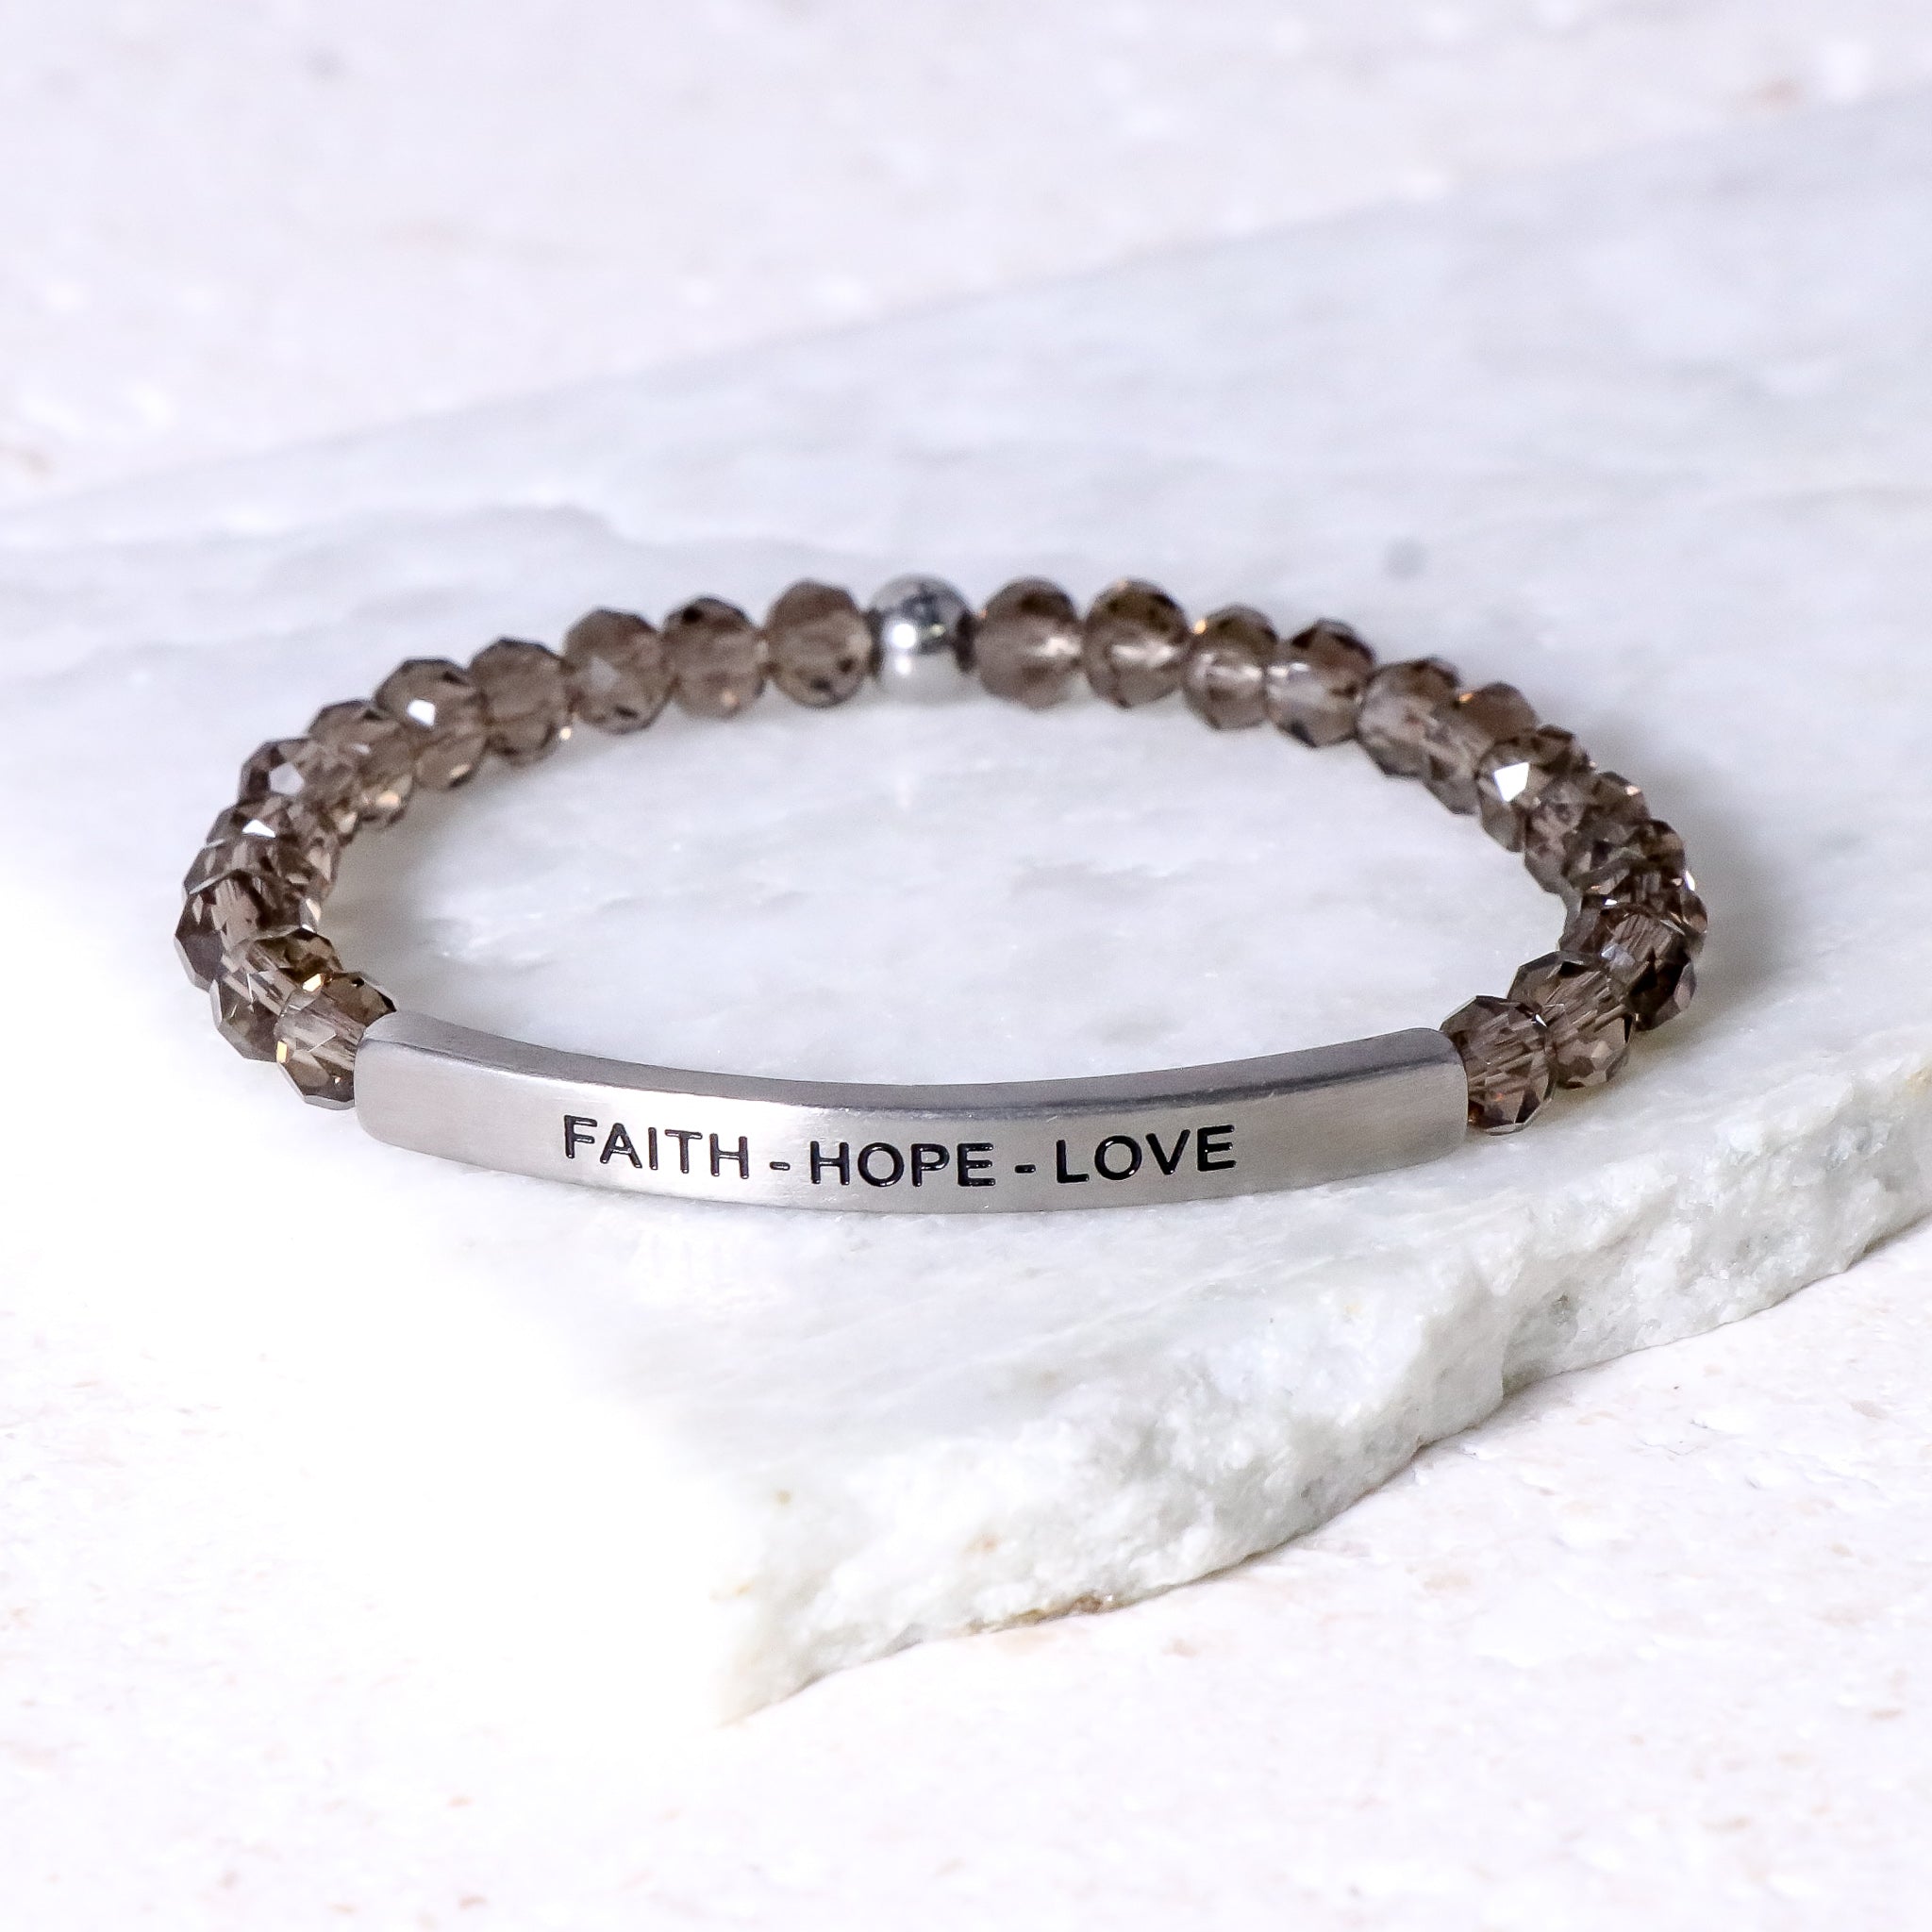 Silver Tone 'Walk By Faith' Metal Bangle Bracelet Featuring Message Charm -  Approximately 2.75